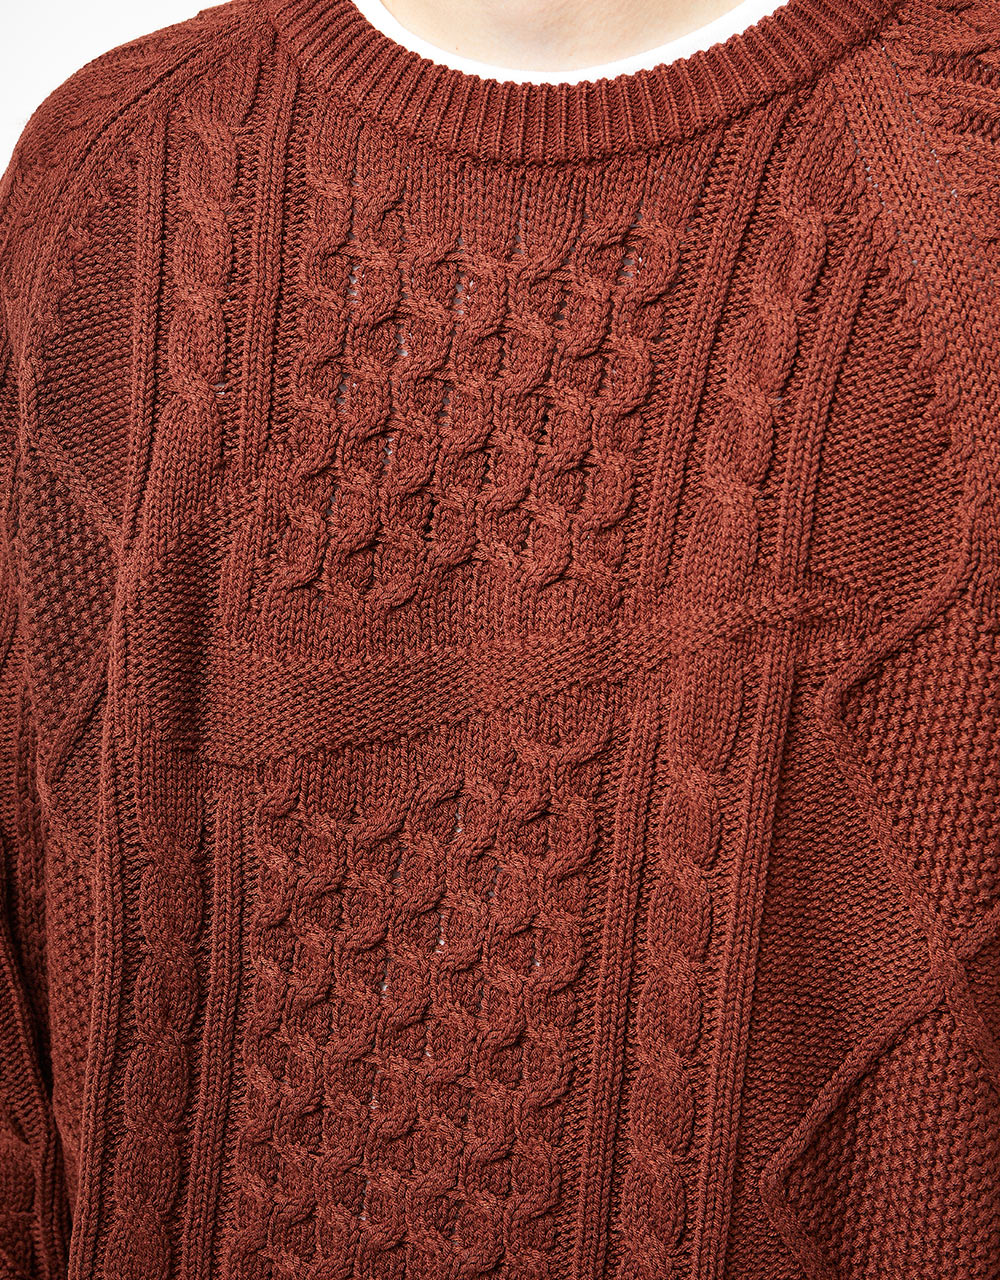 Nike Cable Knit Sweater - Oxen Brown